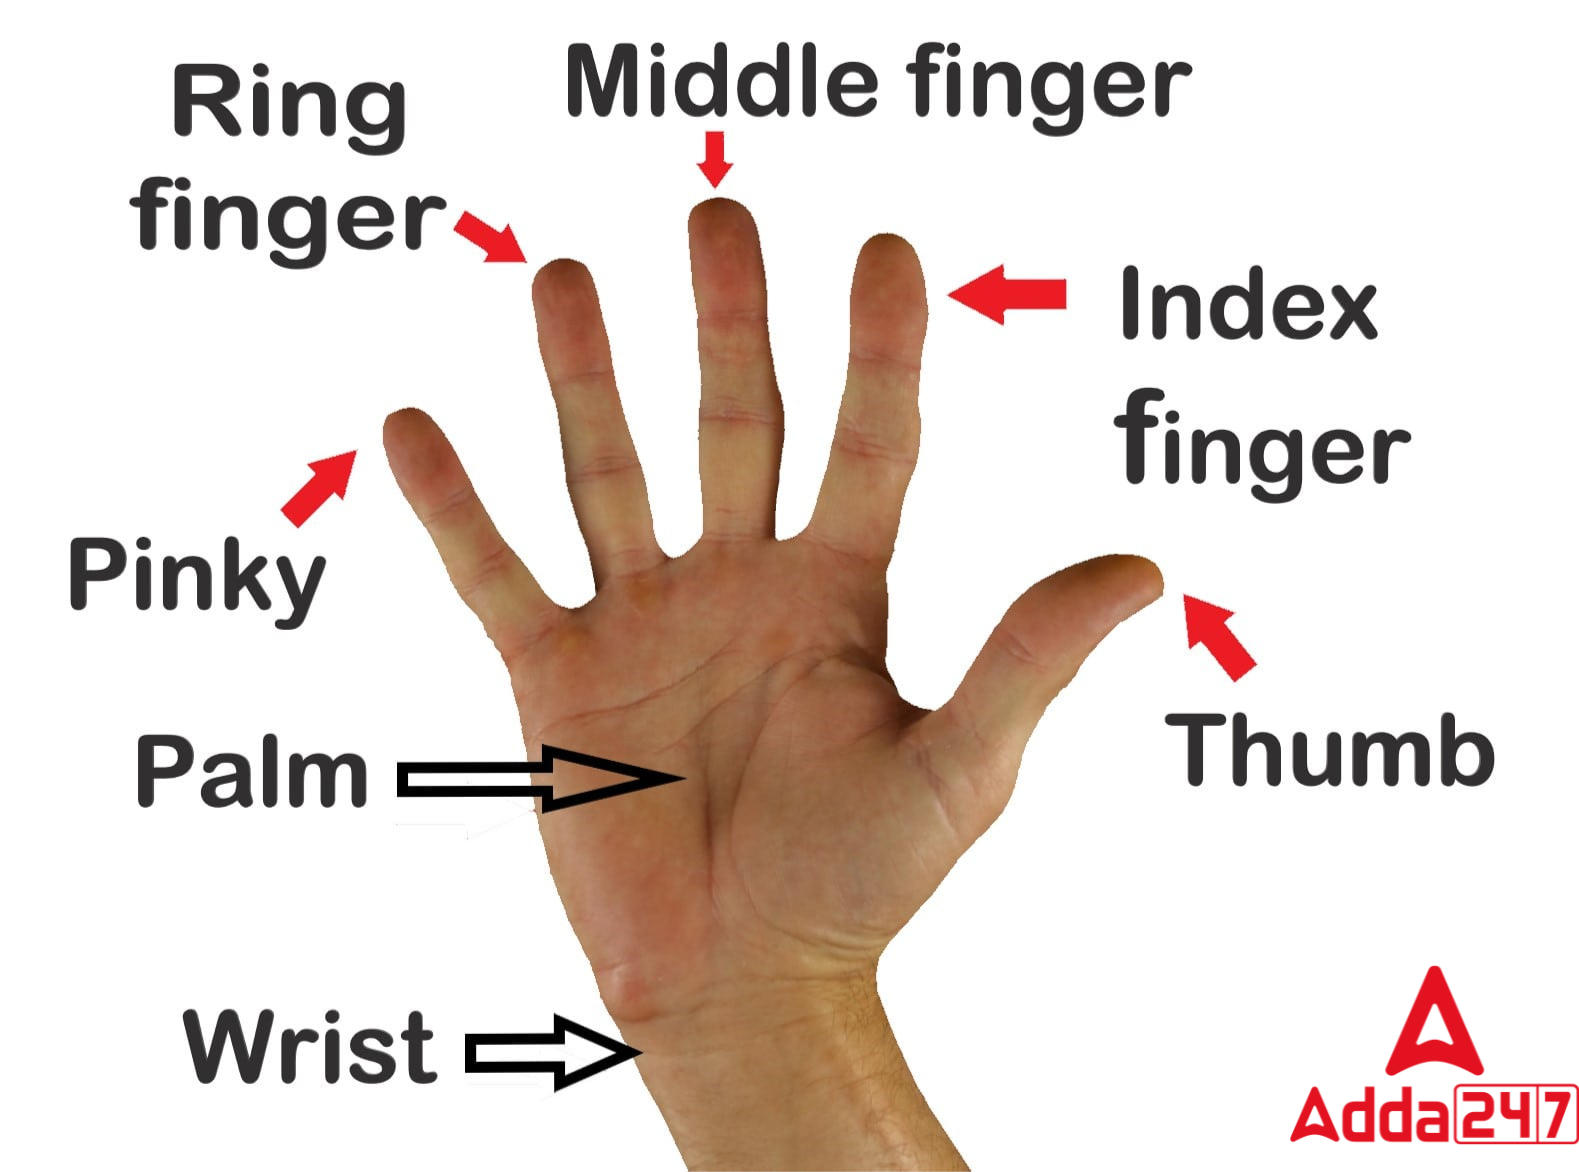 mood ring chart | Mood ring chart, Mood ring, Mood ring meanings